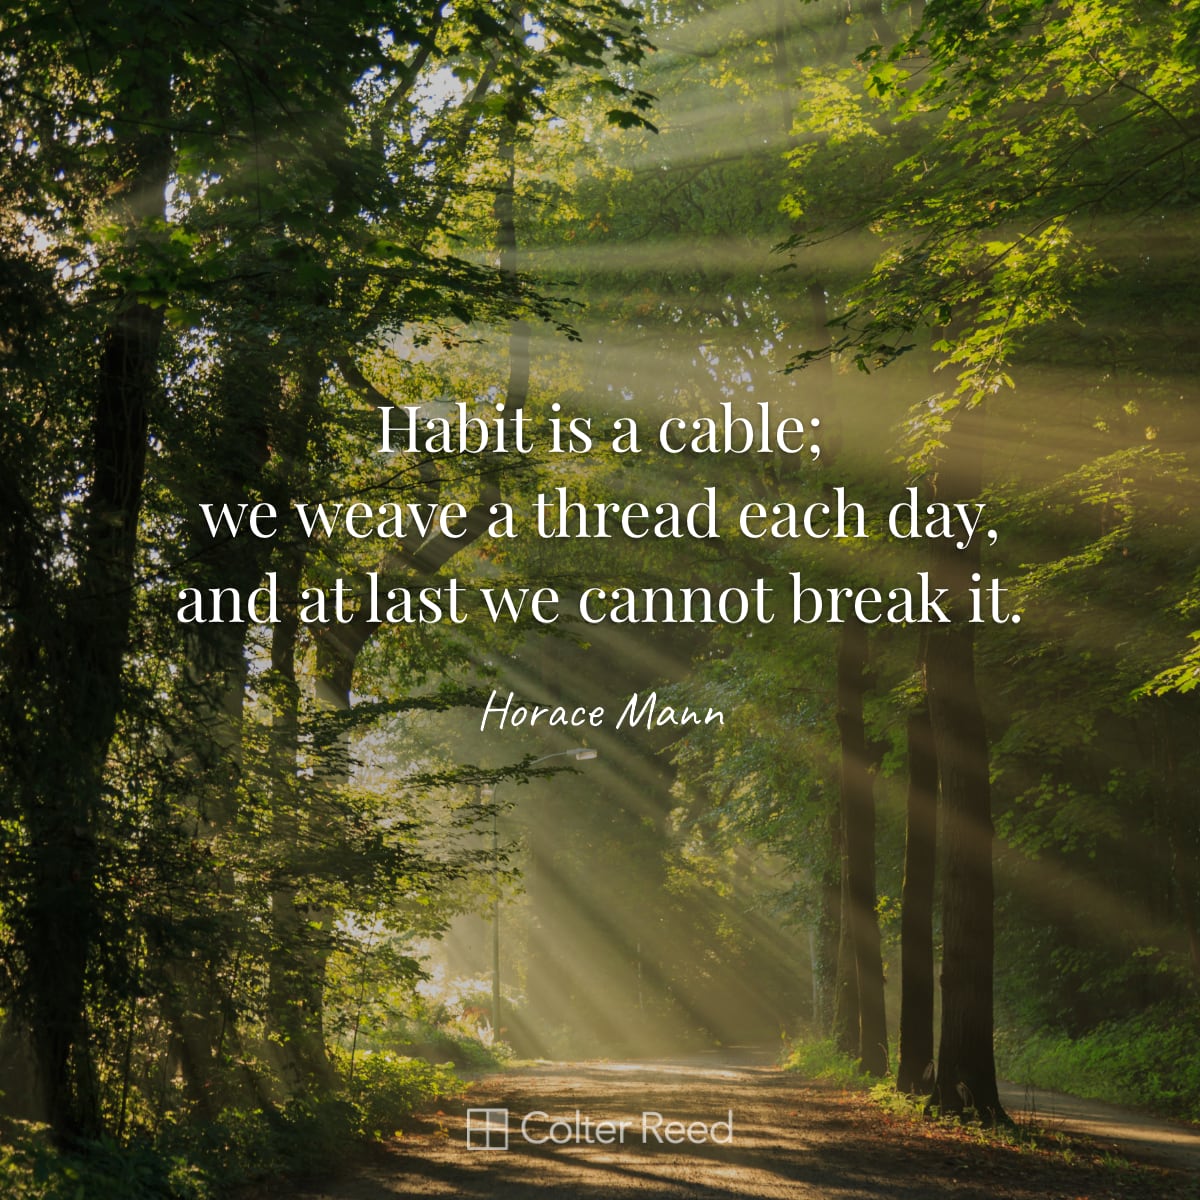 Habit is a cable; we weave a thread each day, and at last we cannot break it. —Horace Mann